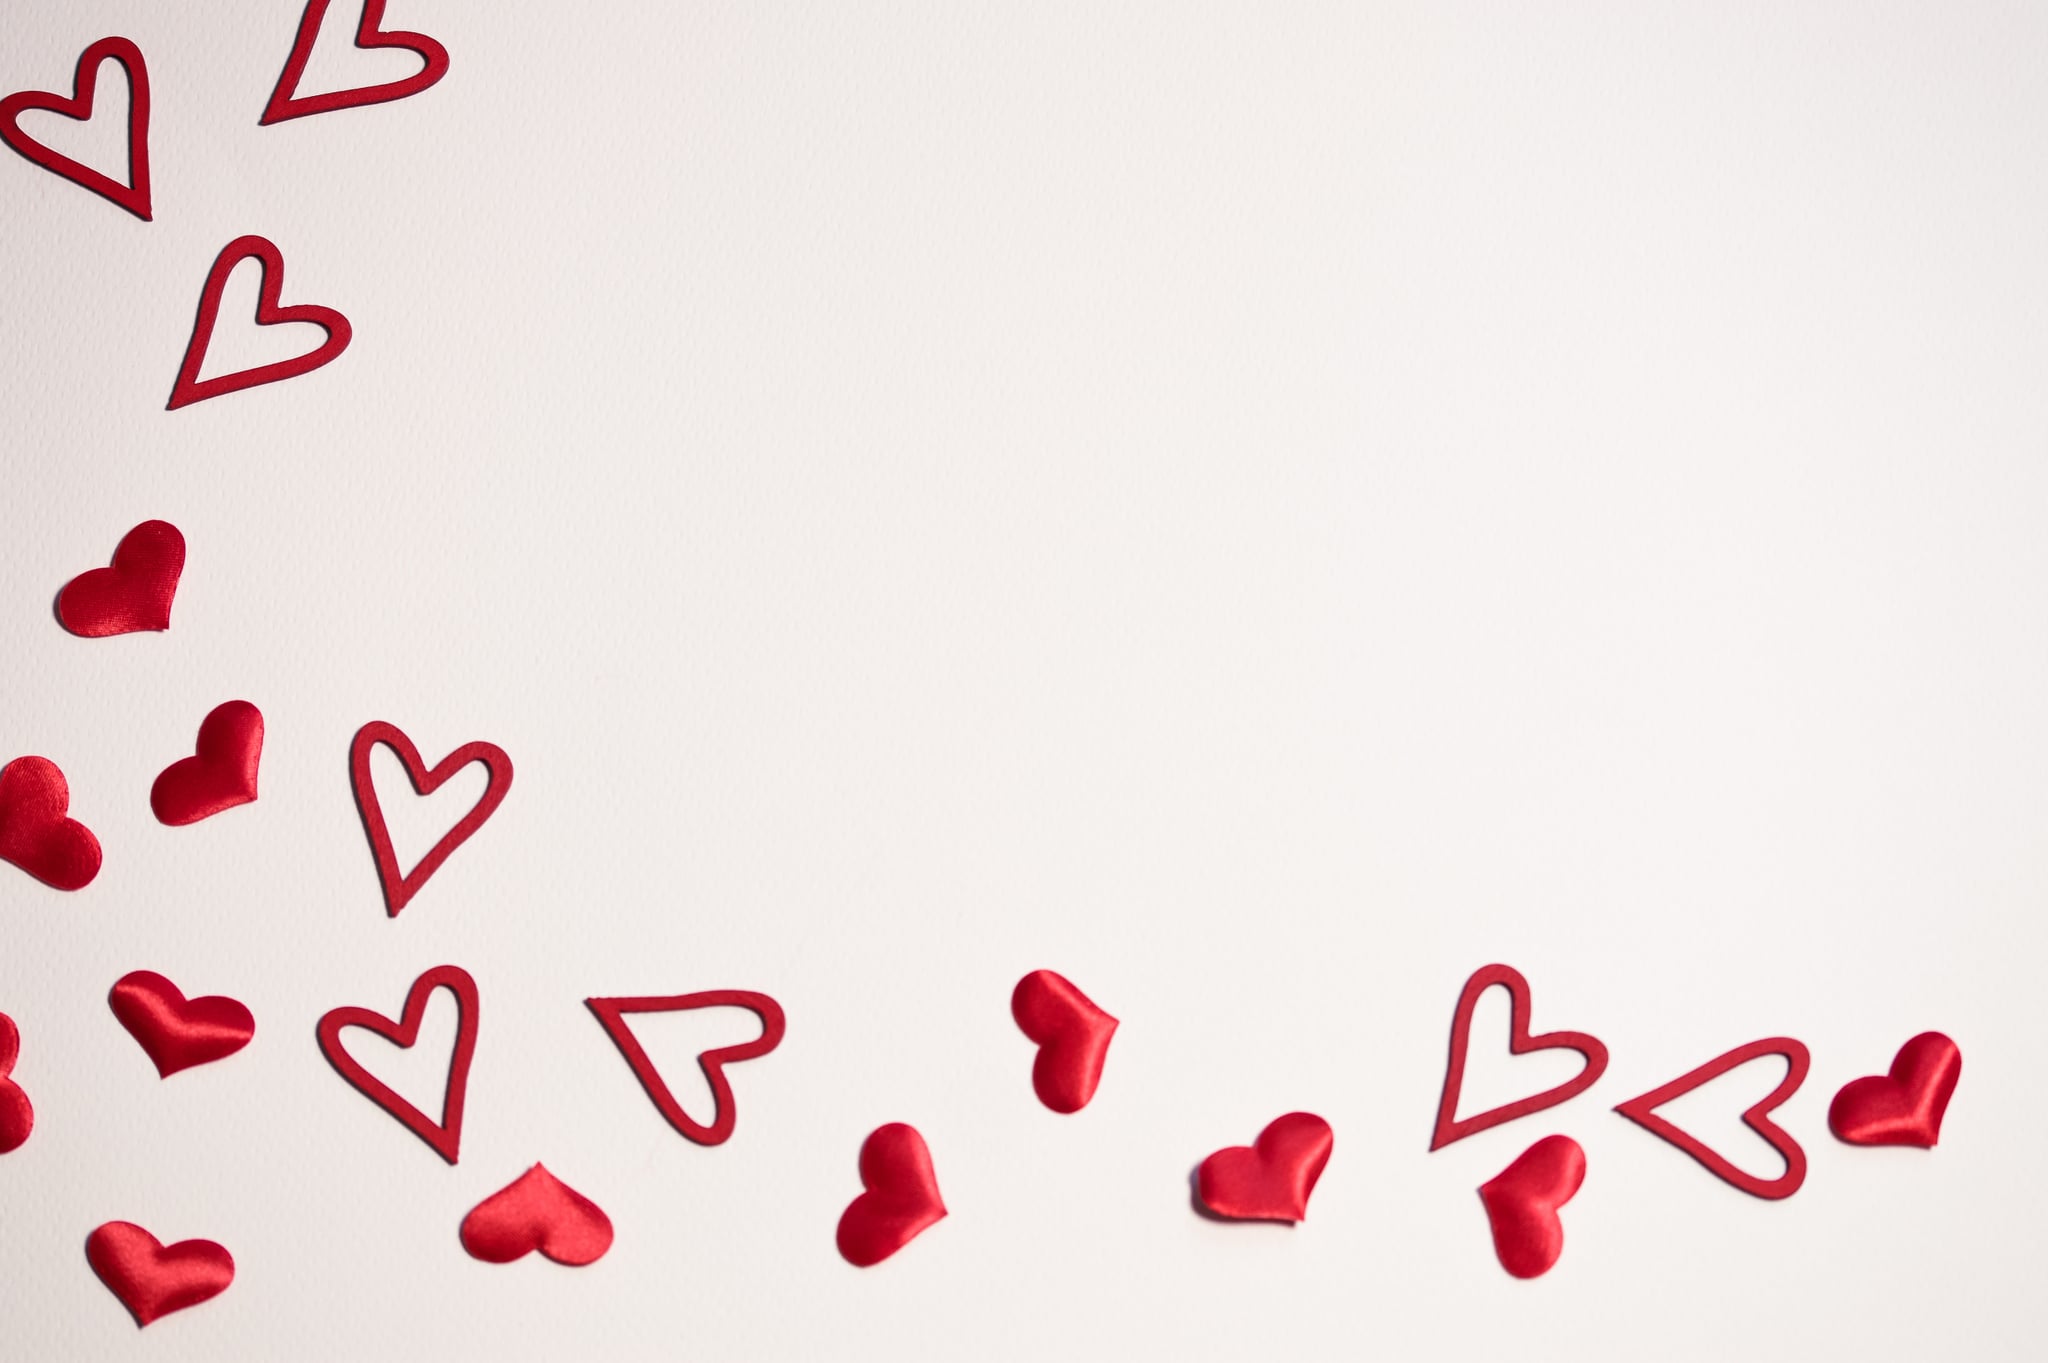 Valentine's Day Zoom Background: Full and Empty Hearts | Share the Love  This Valentine's Day With These 50 Zoom Background Images | POPSUGAR Tech  Photo 34